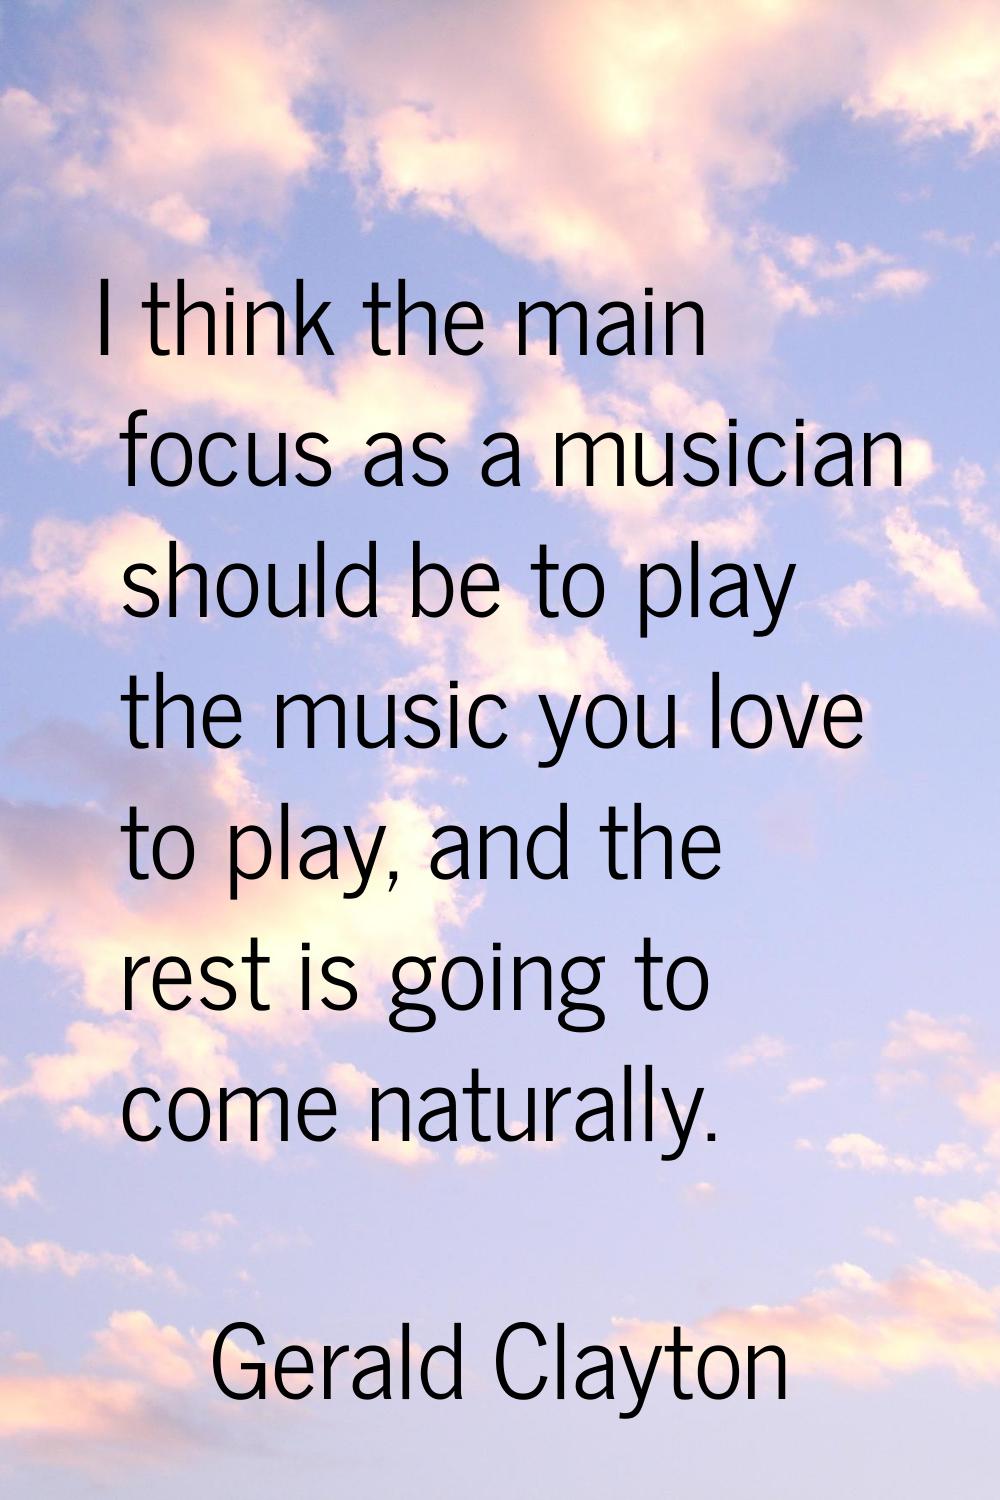 I think the main focus as a musician should be to play the music you love to play, and the rest is 